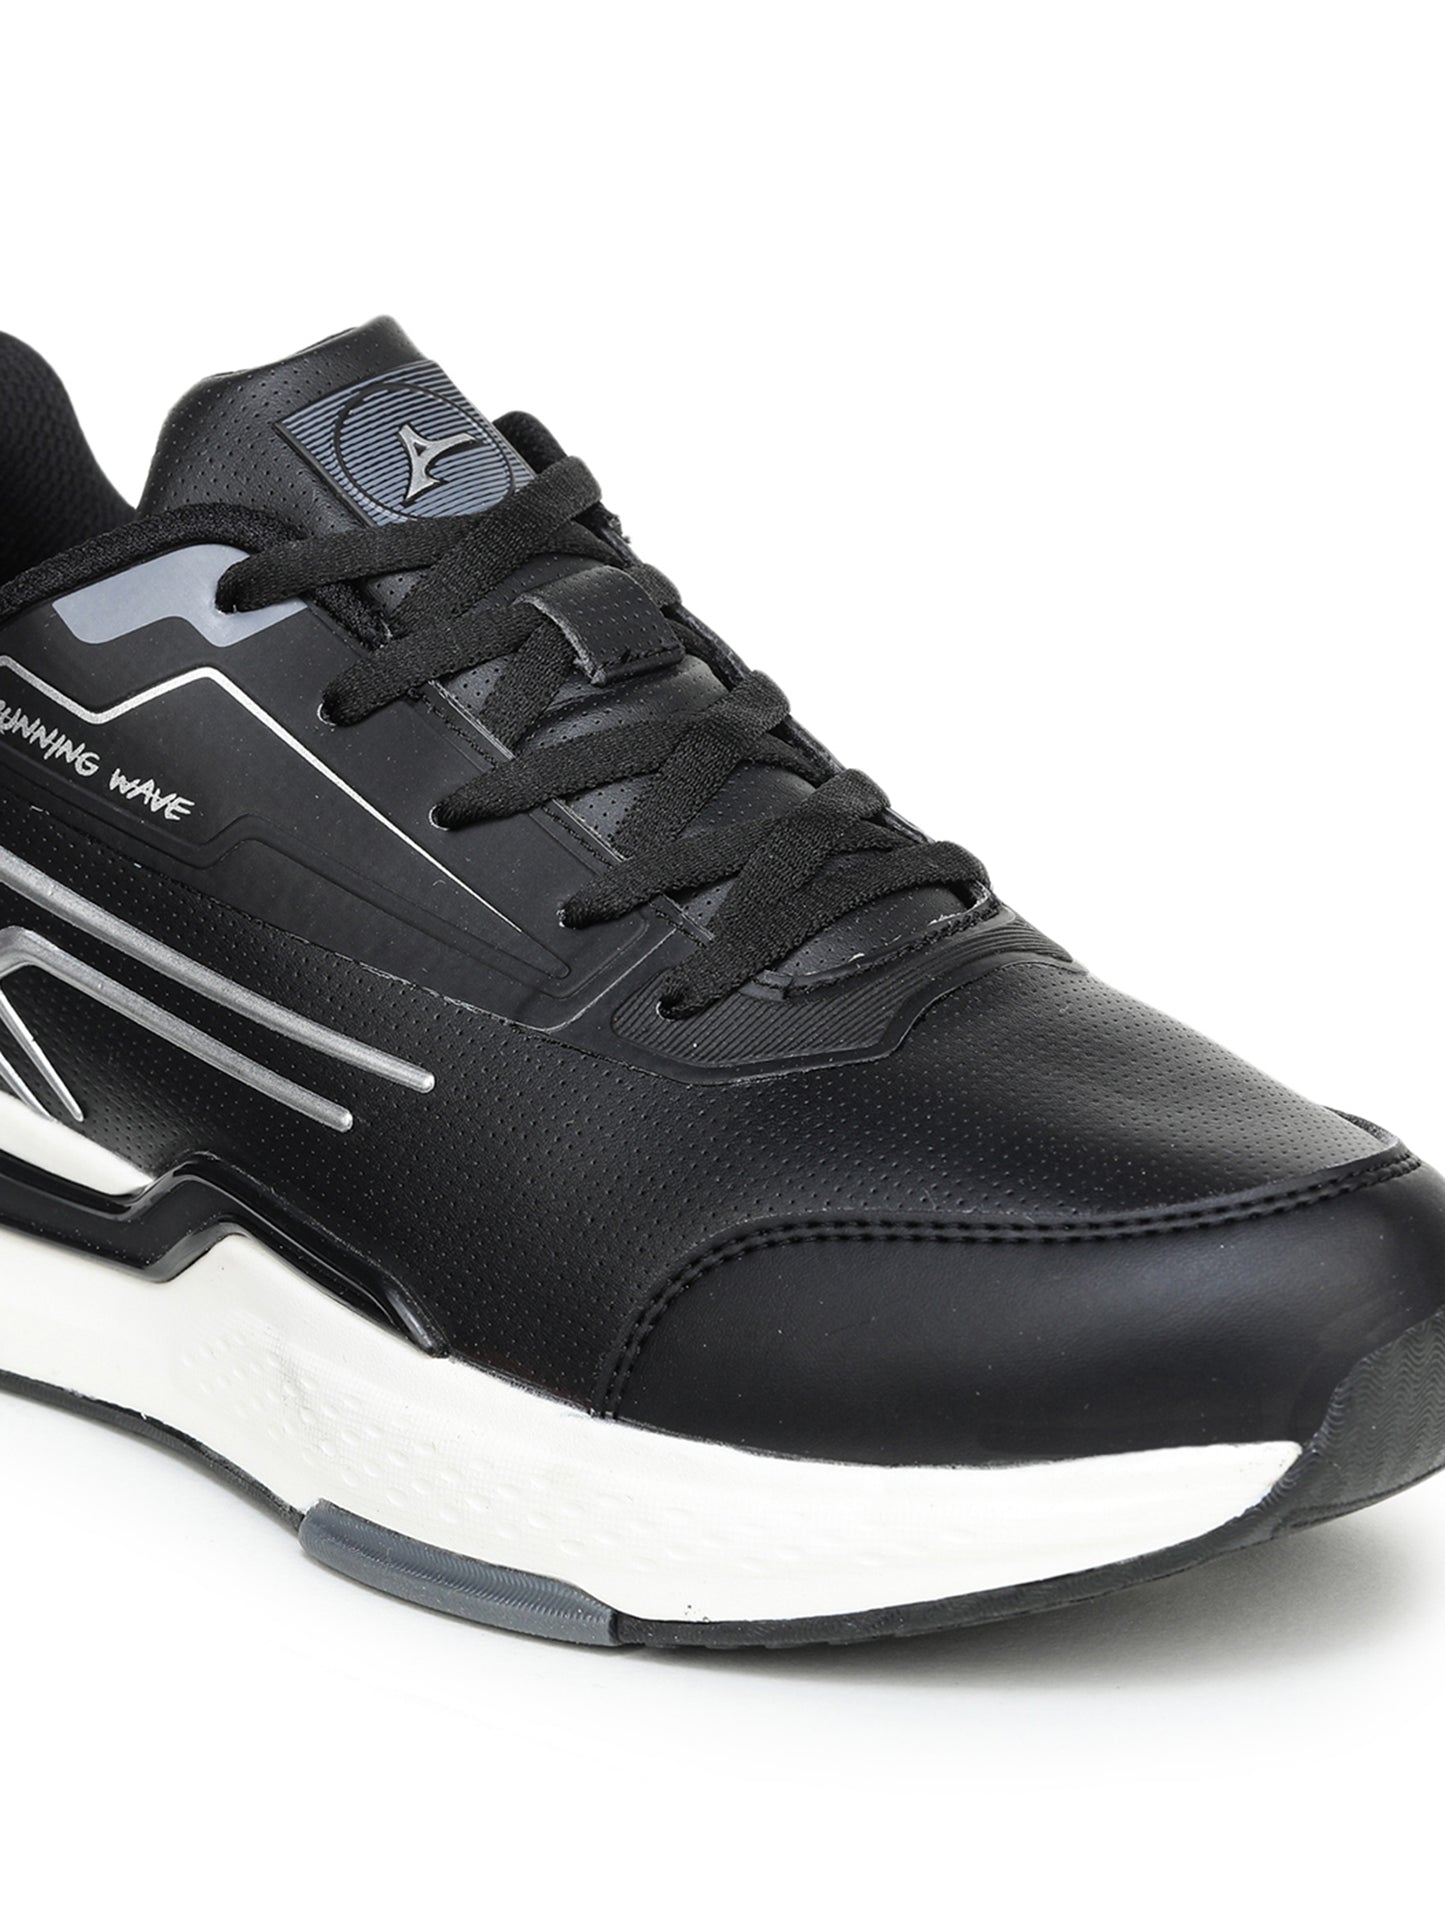 ABROS Isro Sports Shoes For Men